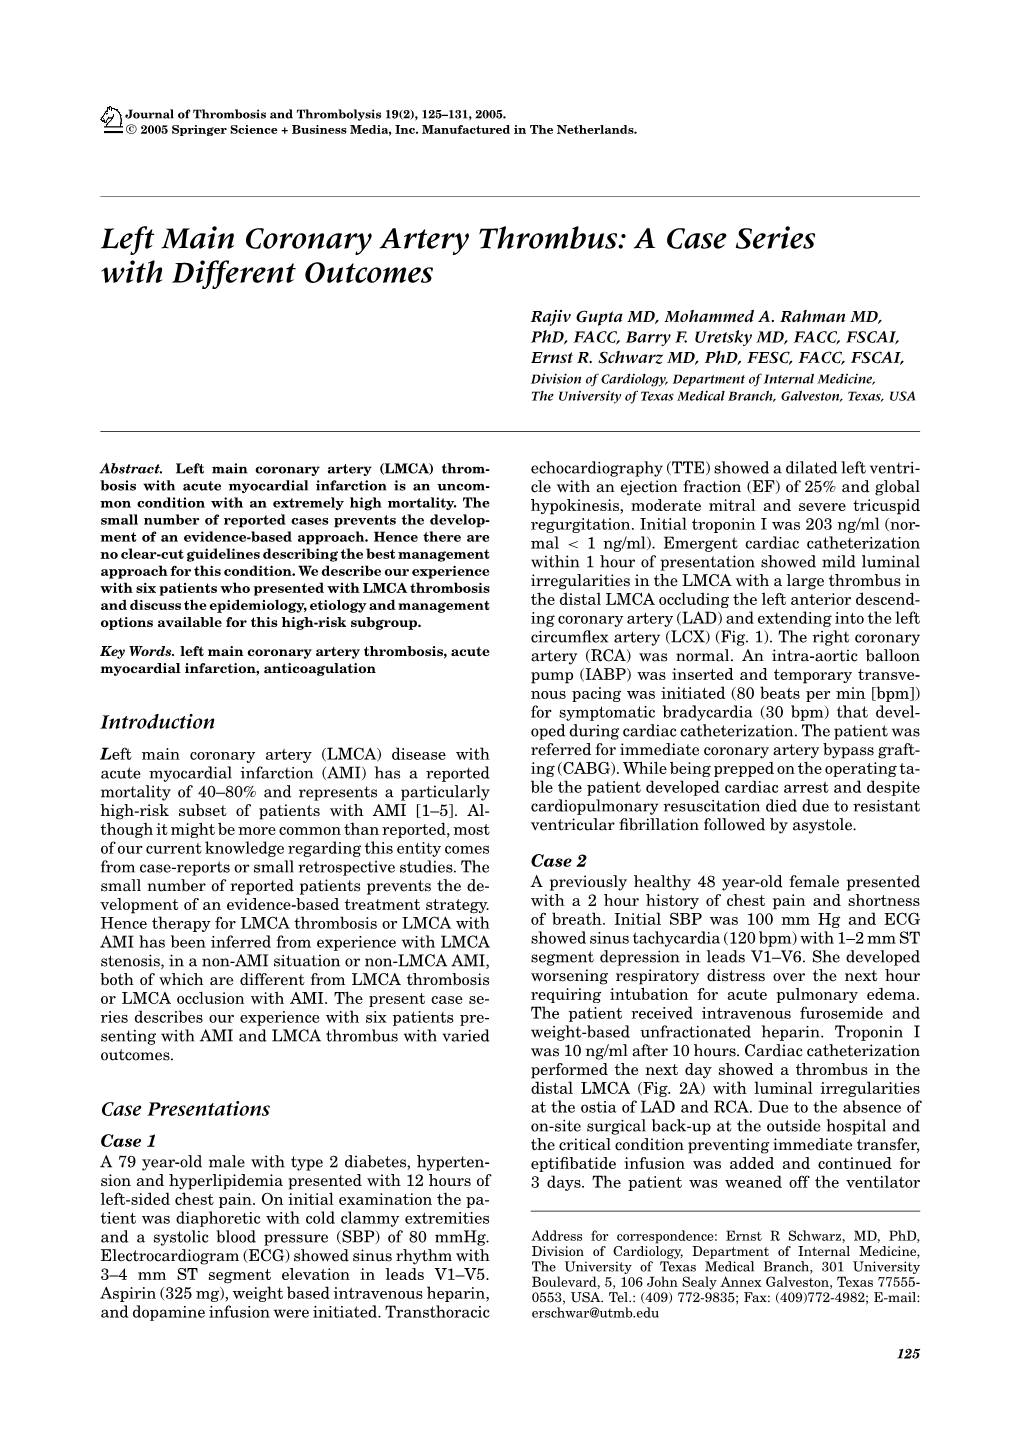 Left Main Coronary Artery Thrombus: a Case Series with Different Outcomes